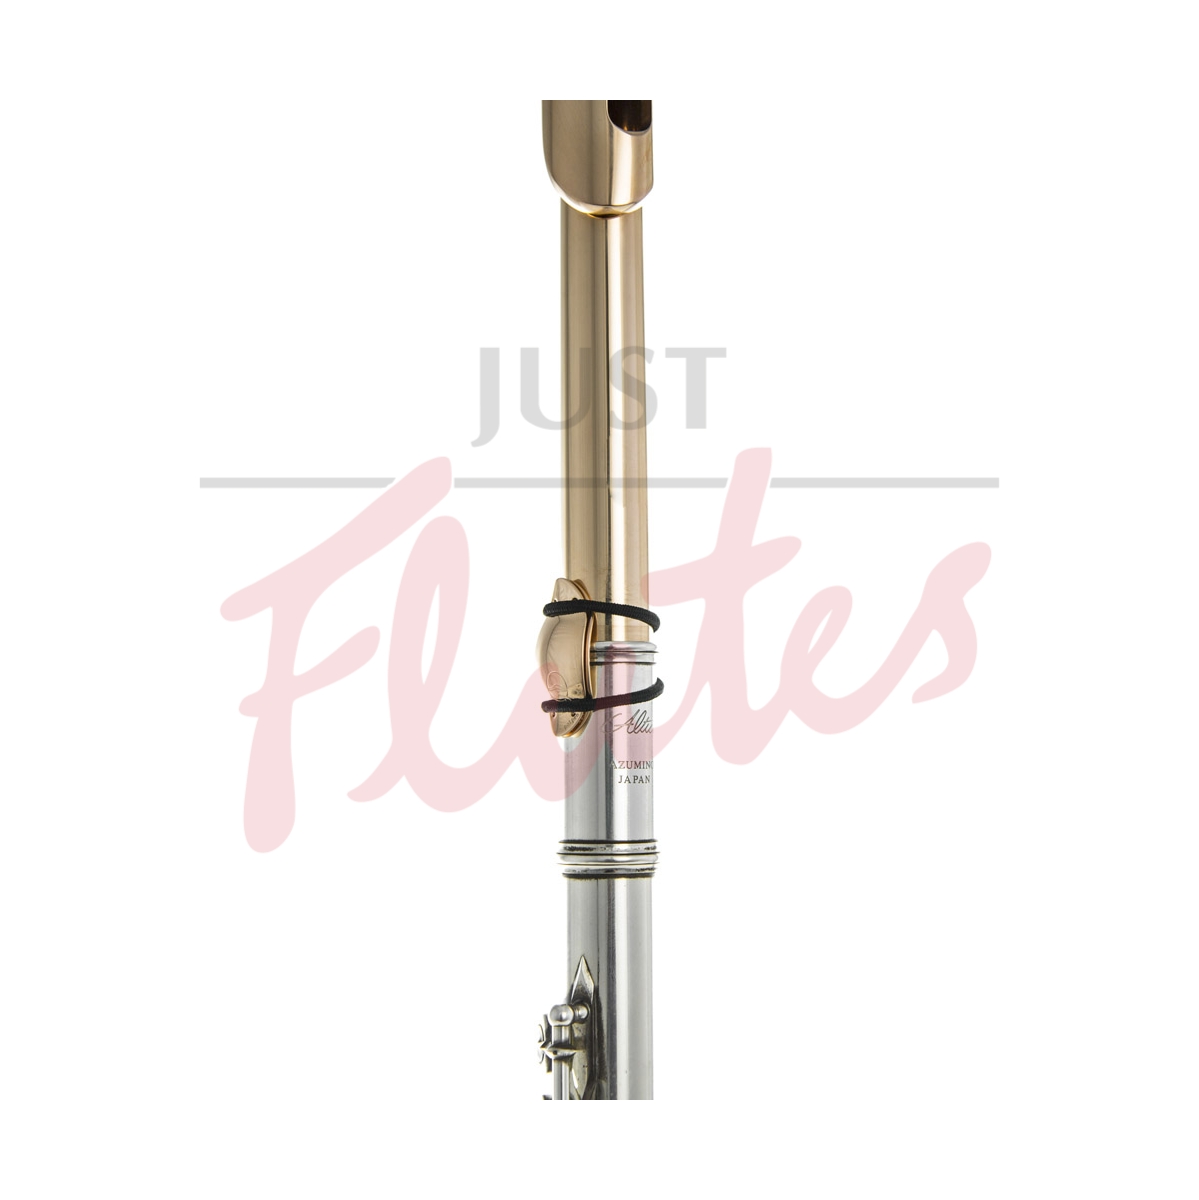 LefreQue Sound Bridge - Gold-Plated Red Brass. Just Flutes